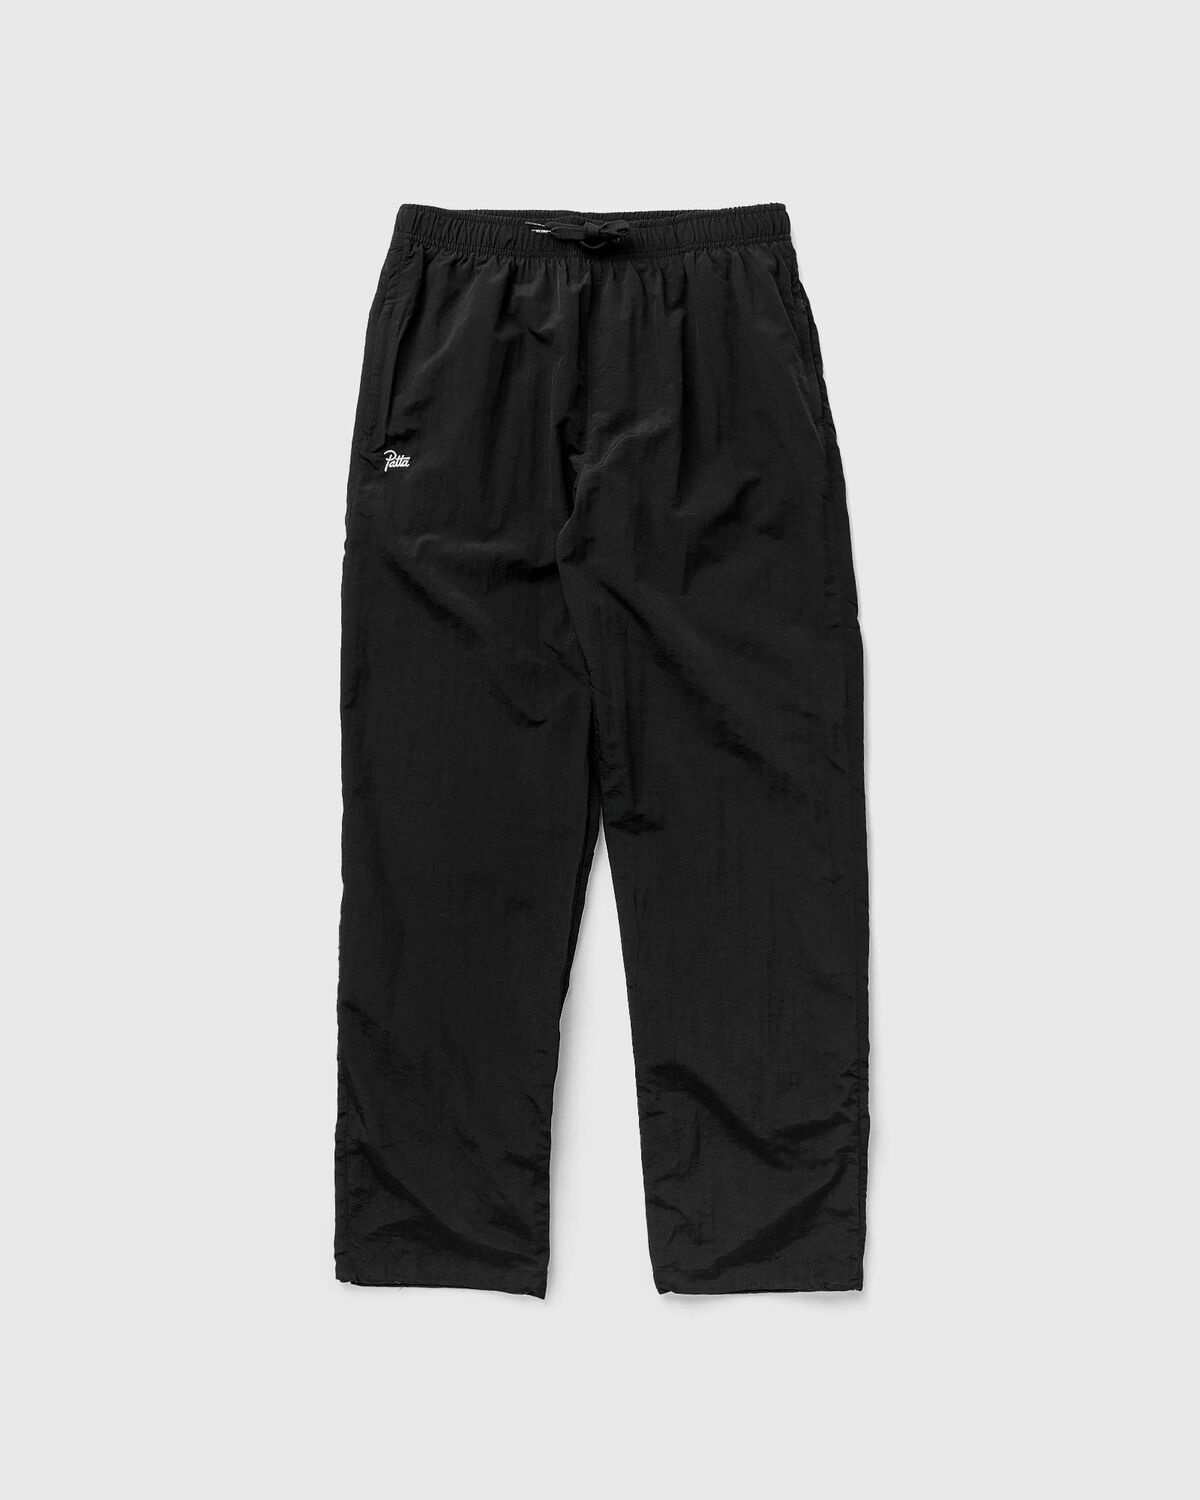 Russell Athletic Archive Track Pant